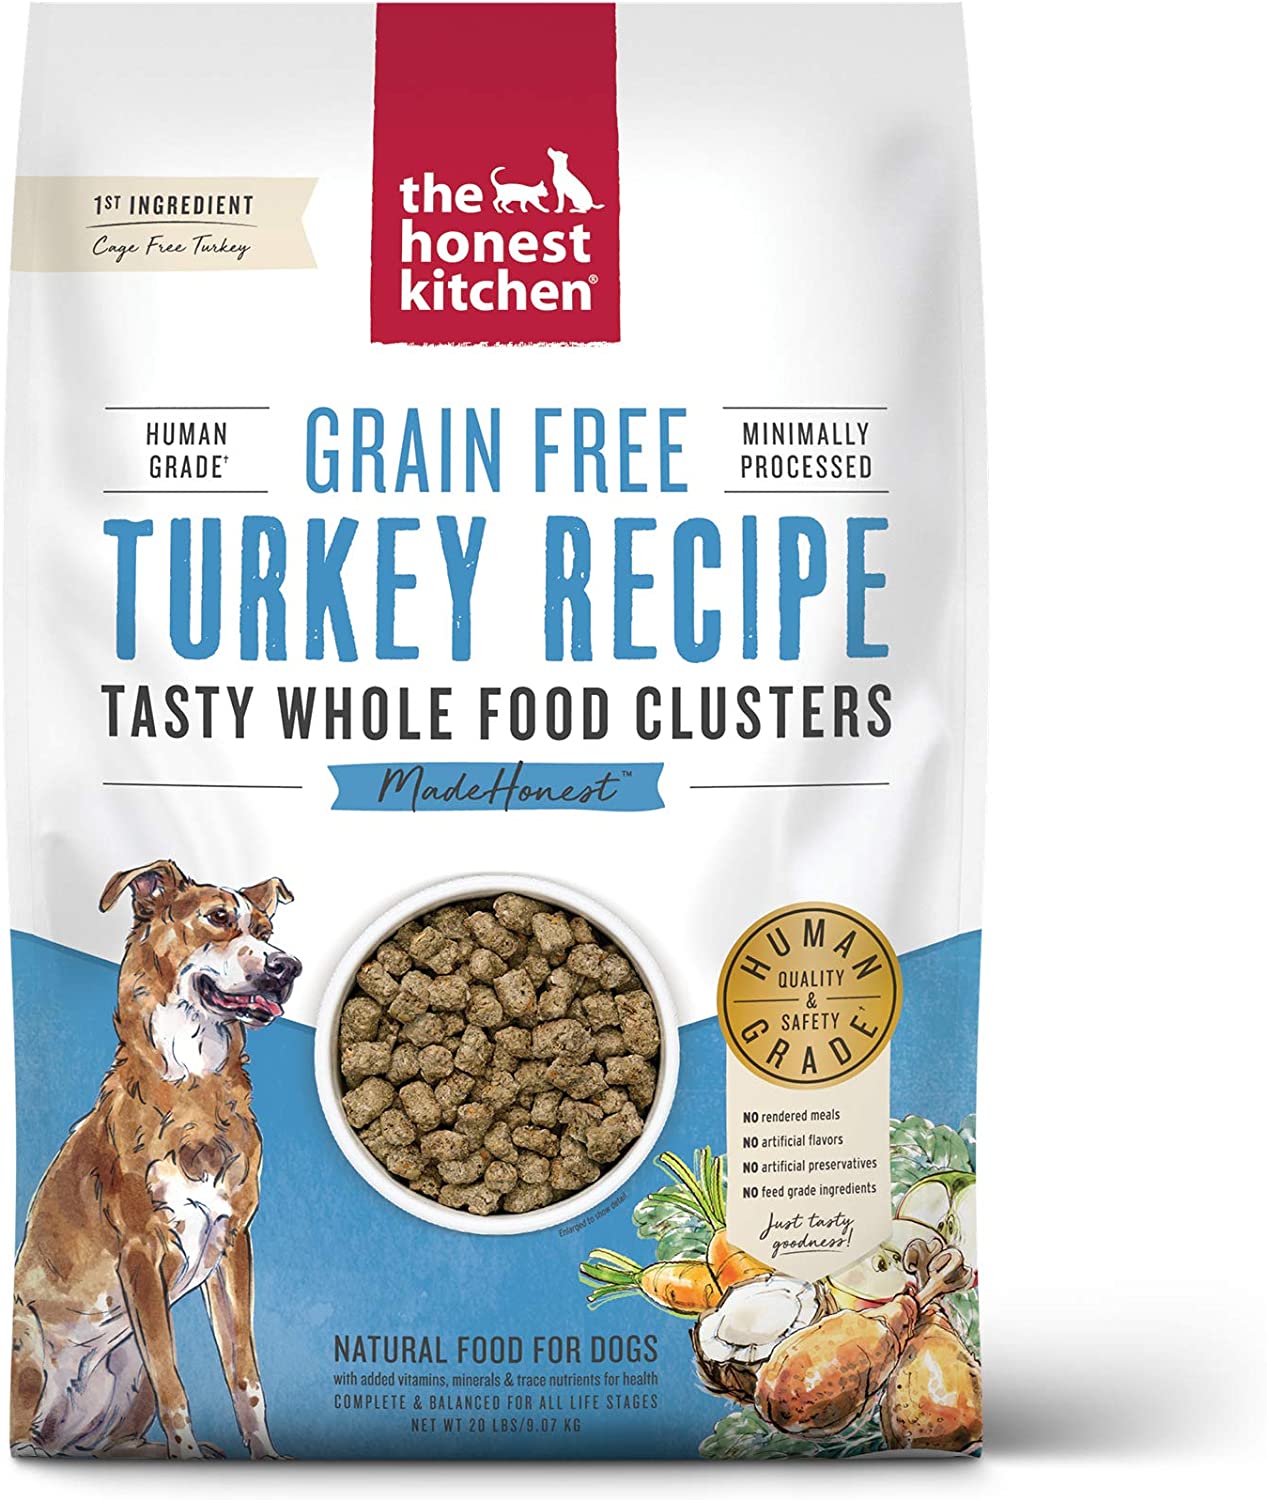 The Honest Kitchen Grain Free Turkey Recipe Tasty Whole Food Clusters Dry Dog Food